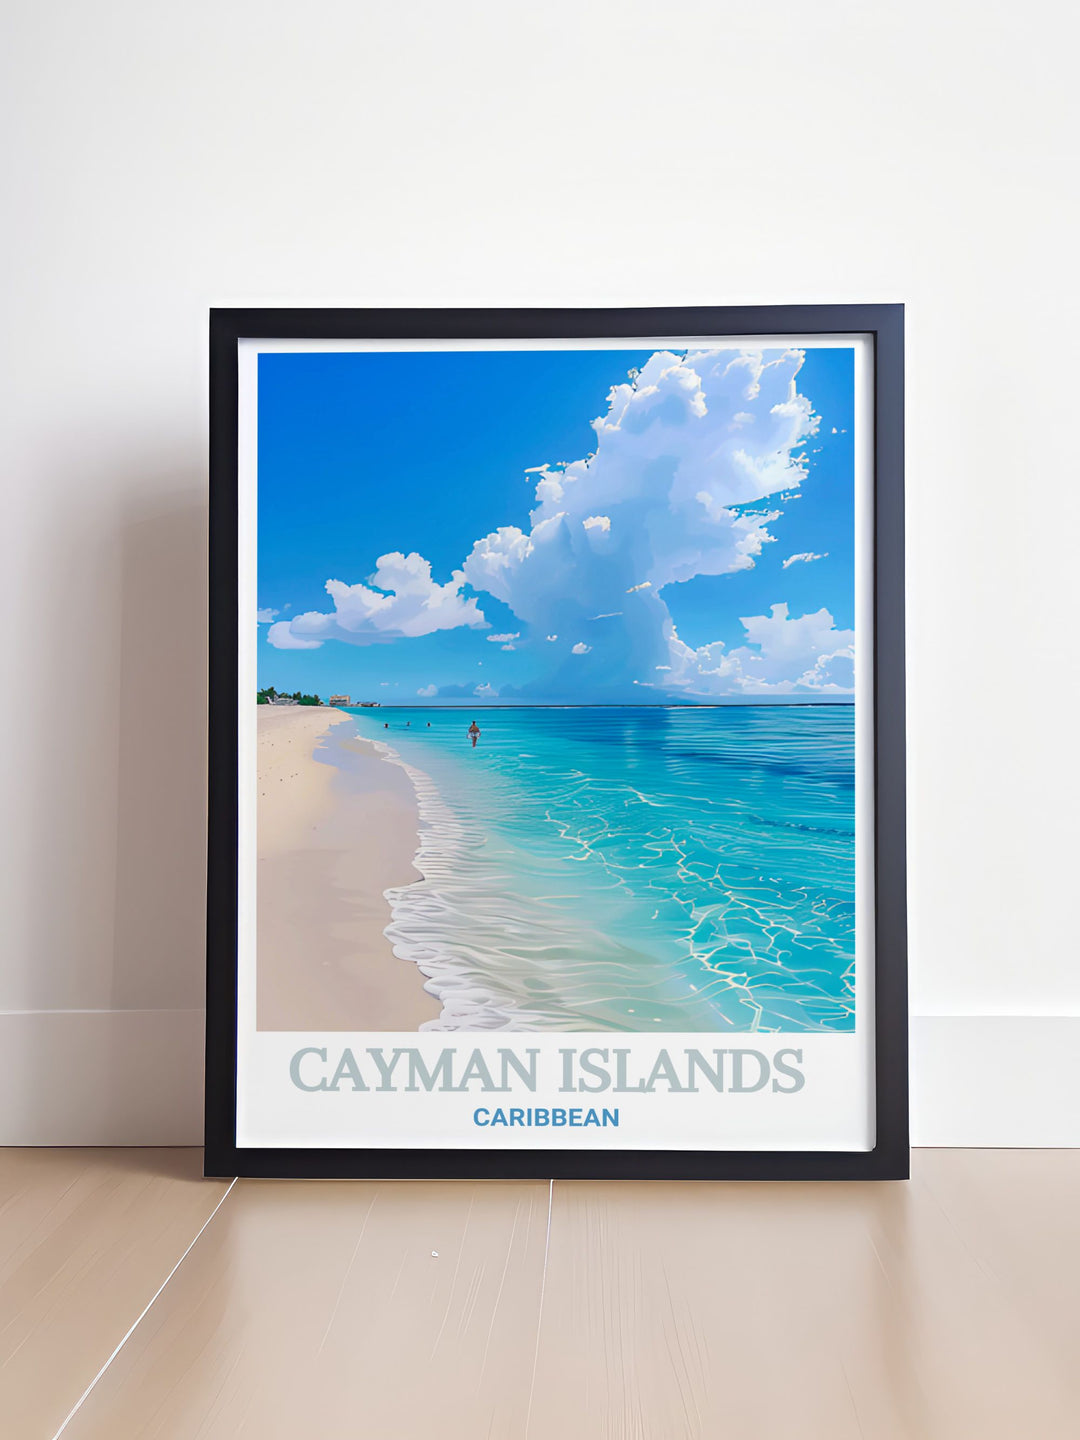 Cayman Islands art print of Seven Mile Beach highlighting the serene landscapes of the Caribbean available as a digital download and personalized gift ideal for travel enthusiasts and lovers of elegant wall decor